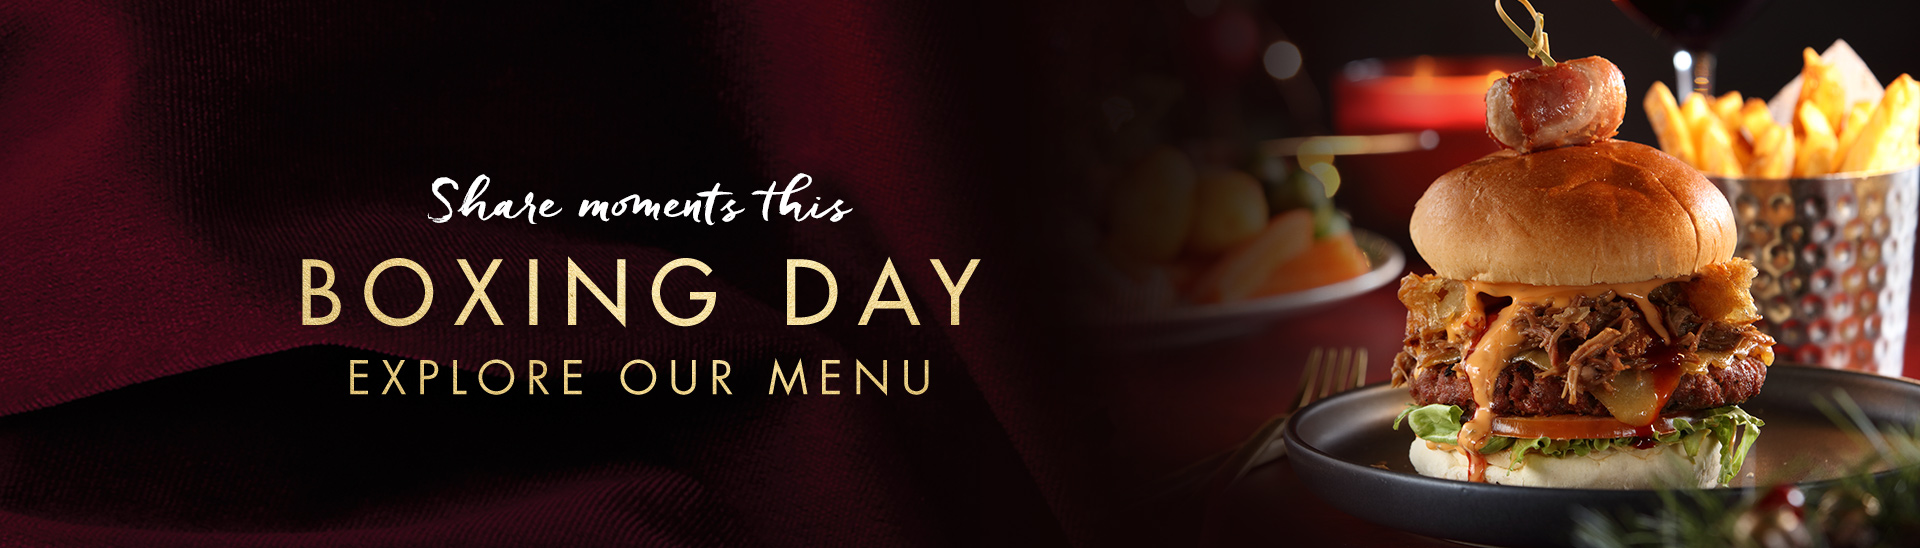 Boxing day menu at Miller & Carter Ainsdale